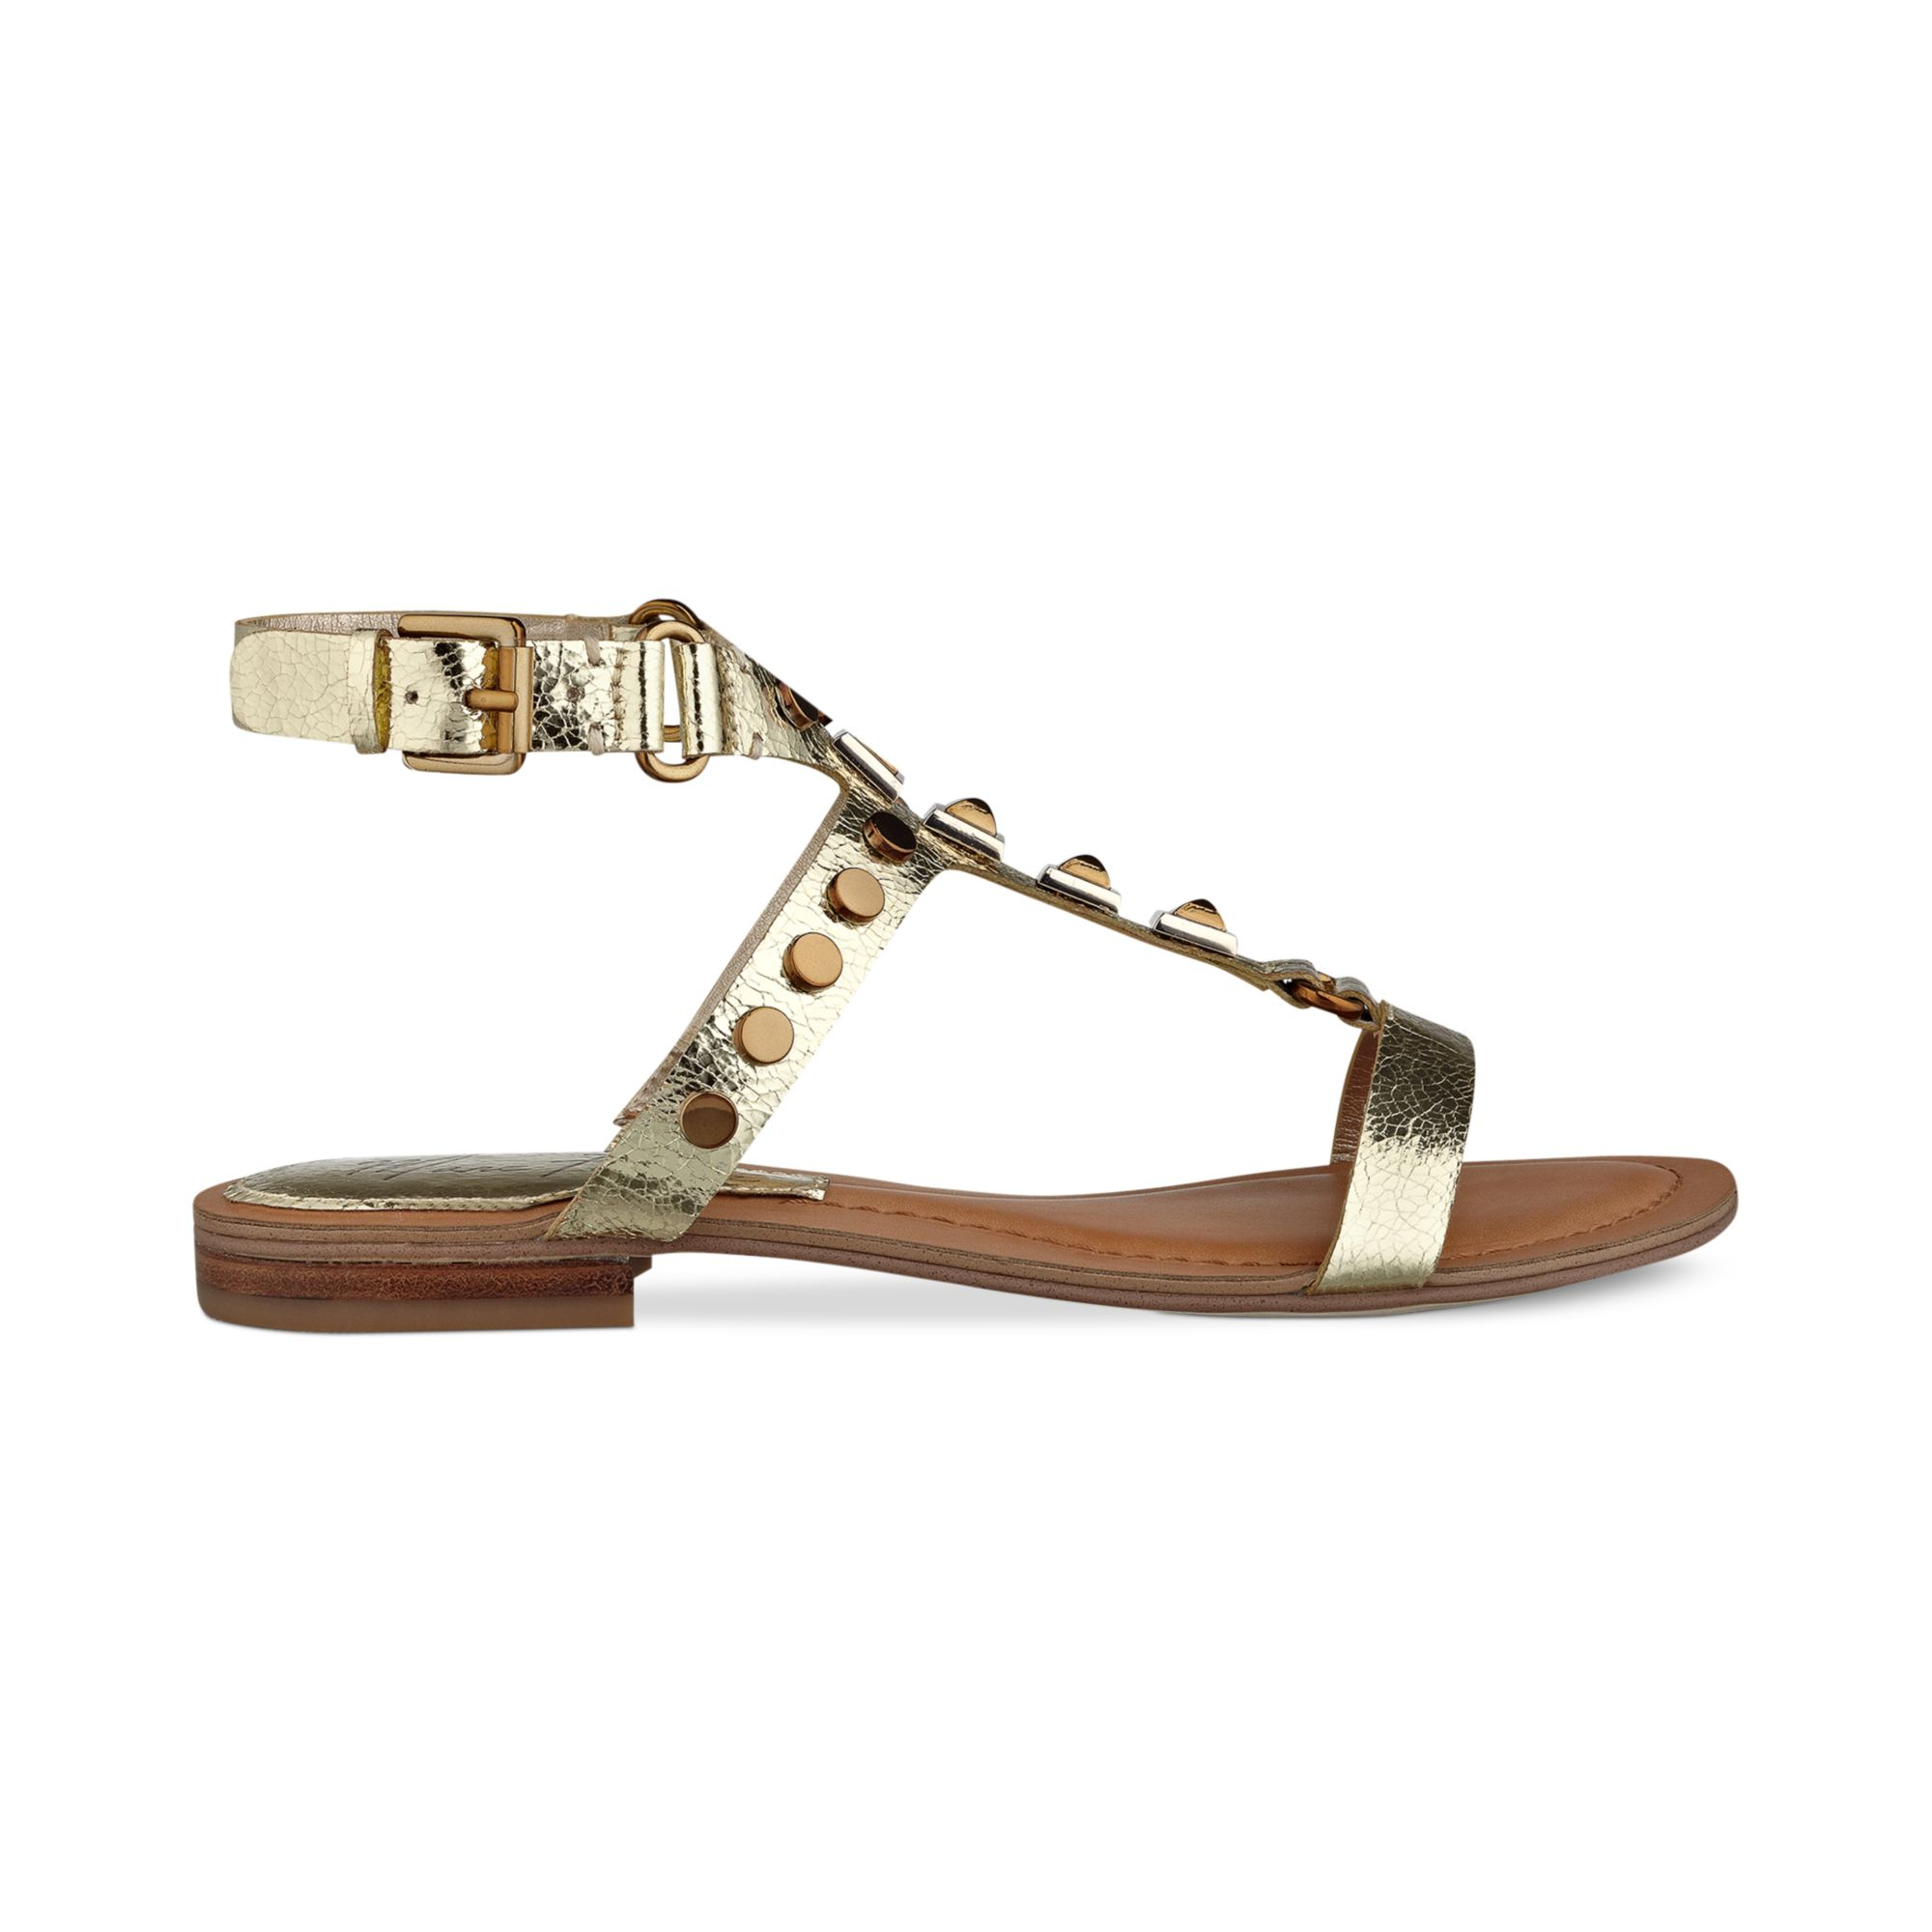 Marc Fisher Bane Studded Flat Sandals in Gold (Metallic